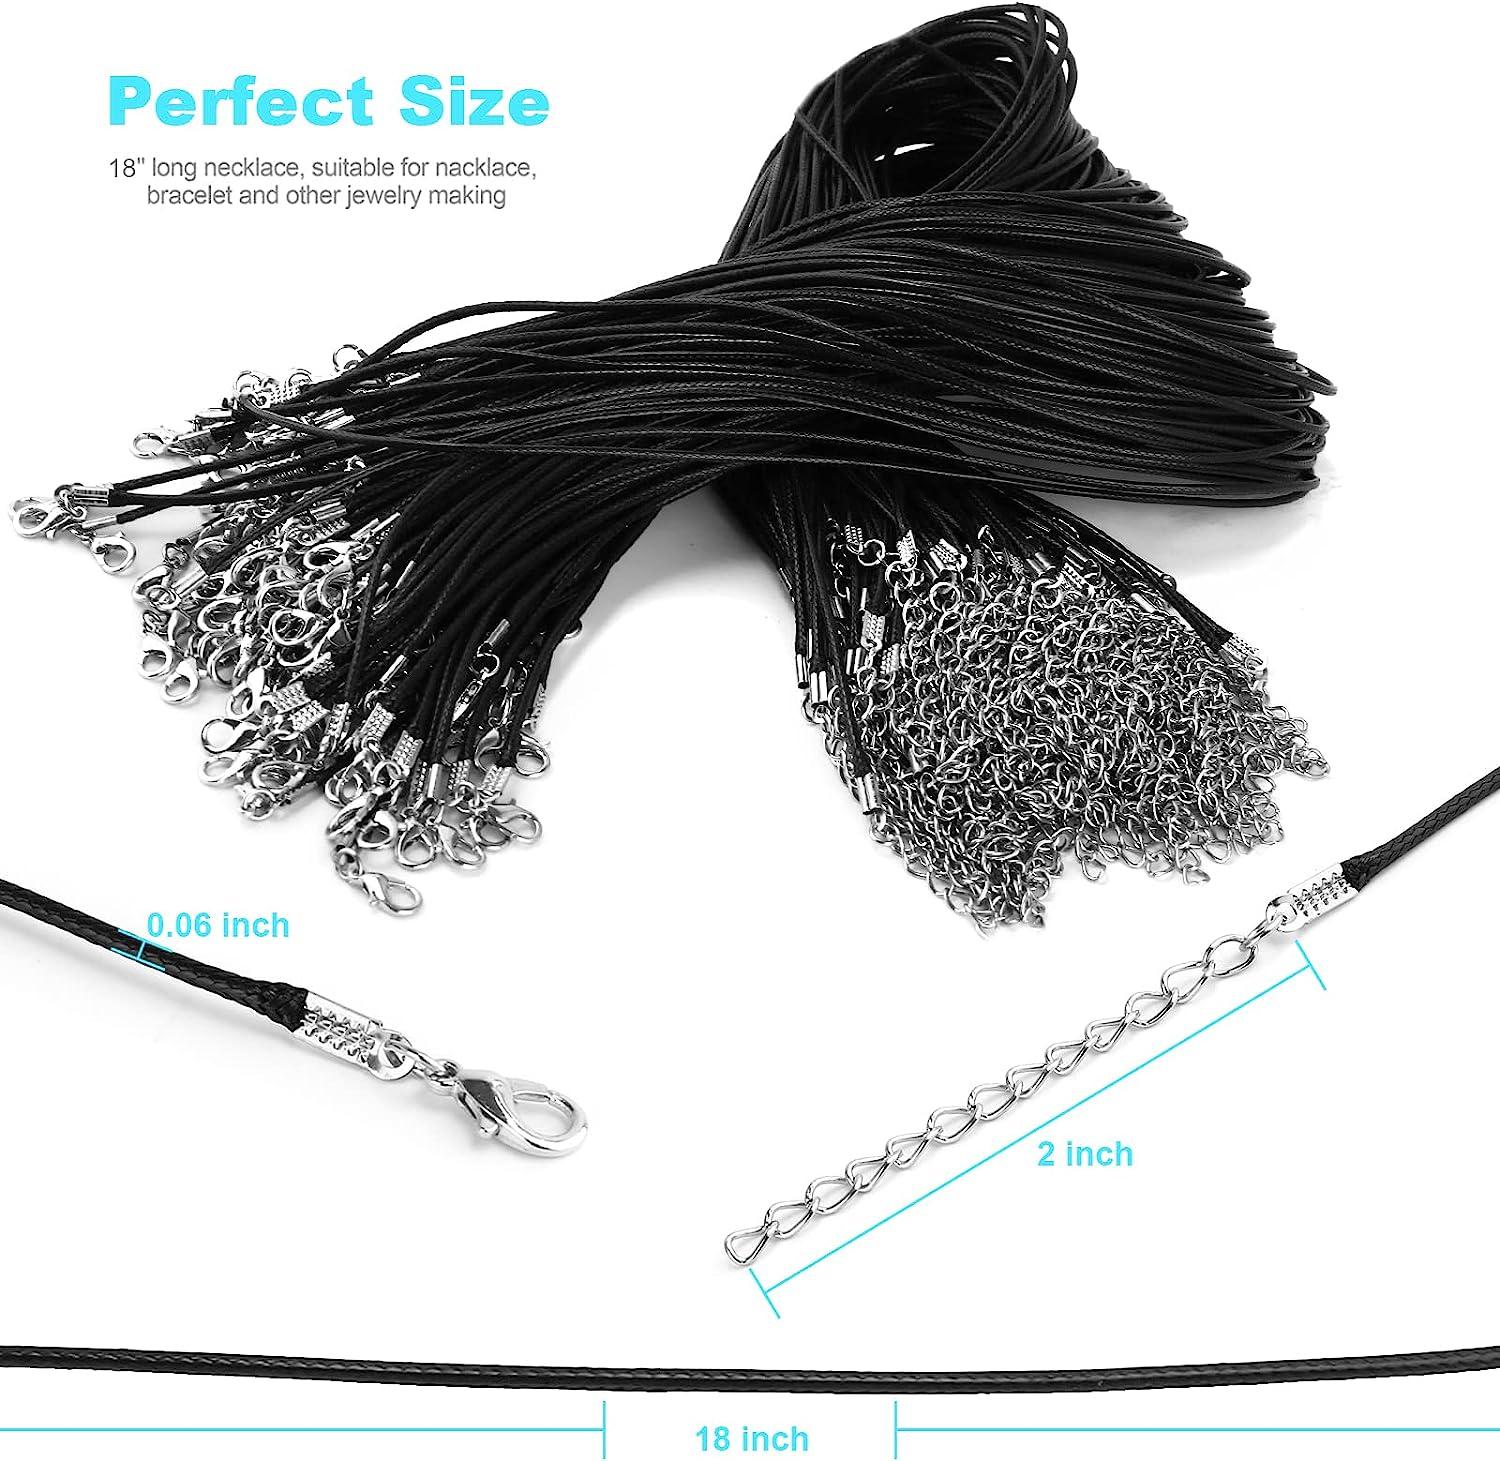 Necklace Cord,Black Necklace String Rope with Clasp, 20 Inch Black Waxed  Cotton Cord Necklace Bulk for Charms Pendants, Bracelets, Necklaces,  Jewelry